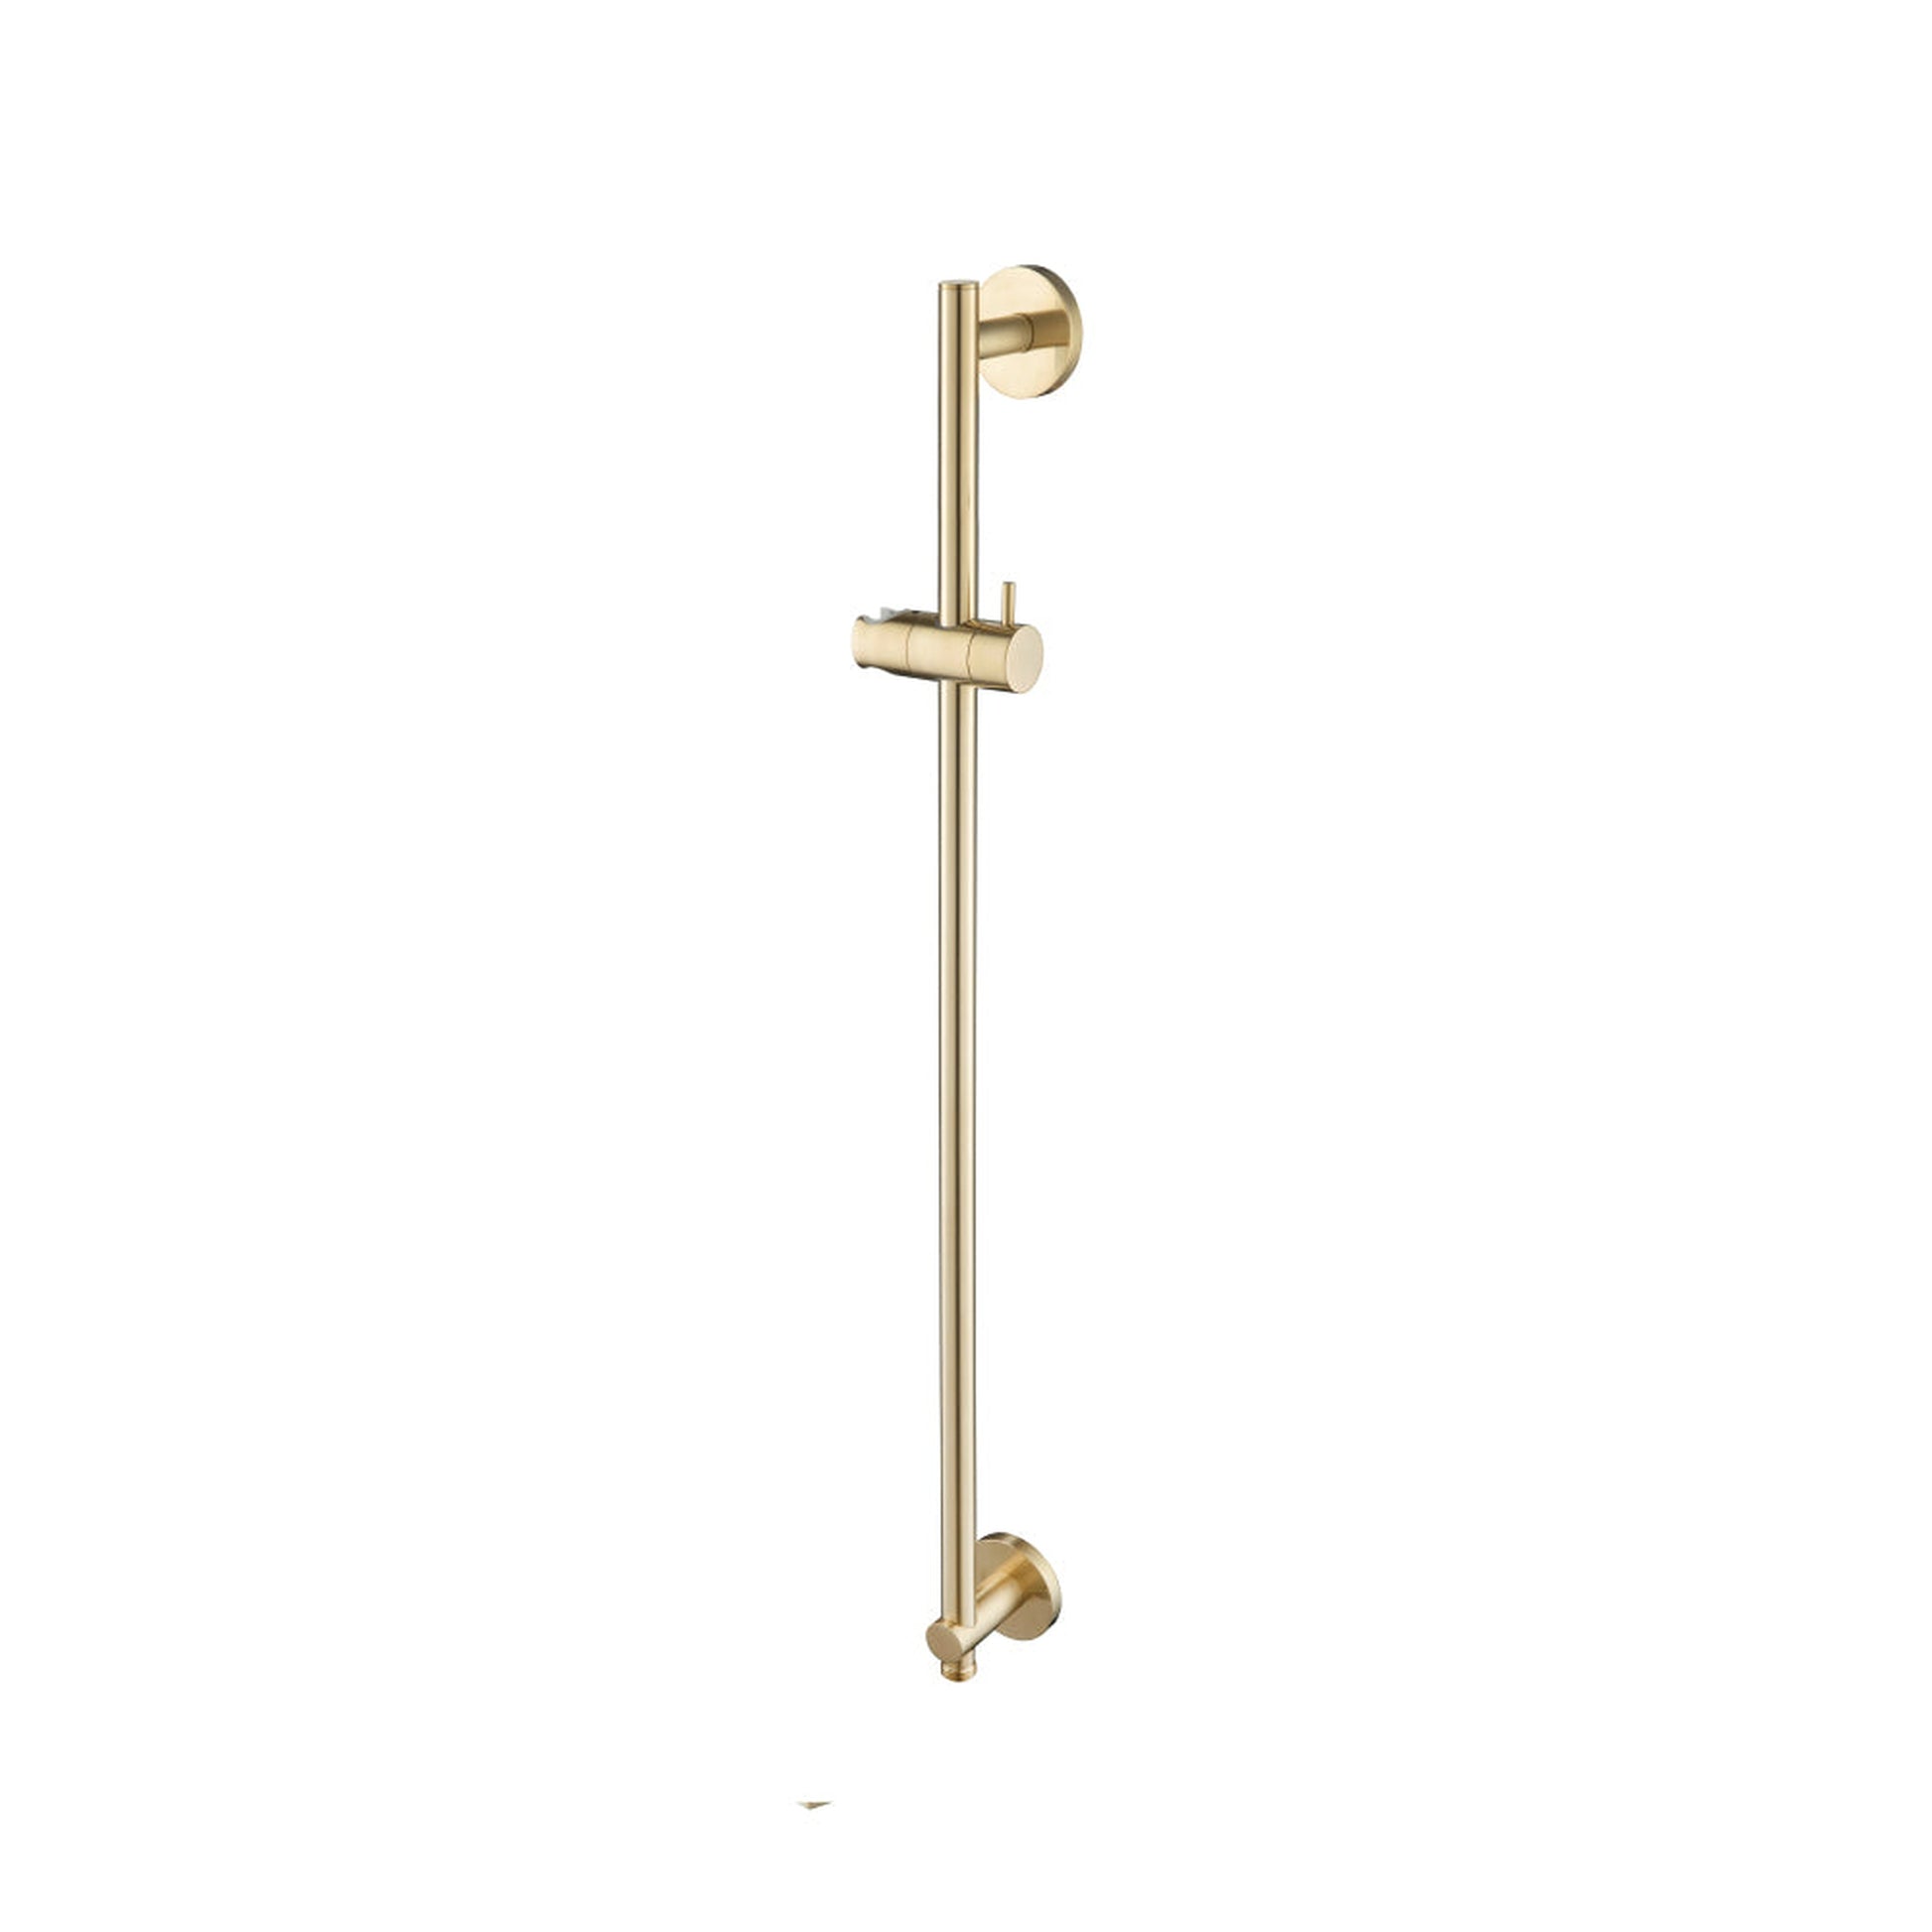 Isenberg Serie 100 Shower Slide Bar With Integrated Wall Elbow in Satin Brass